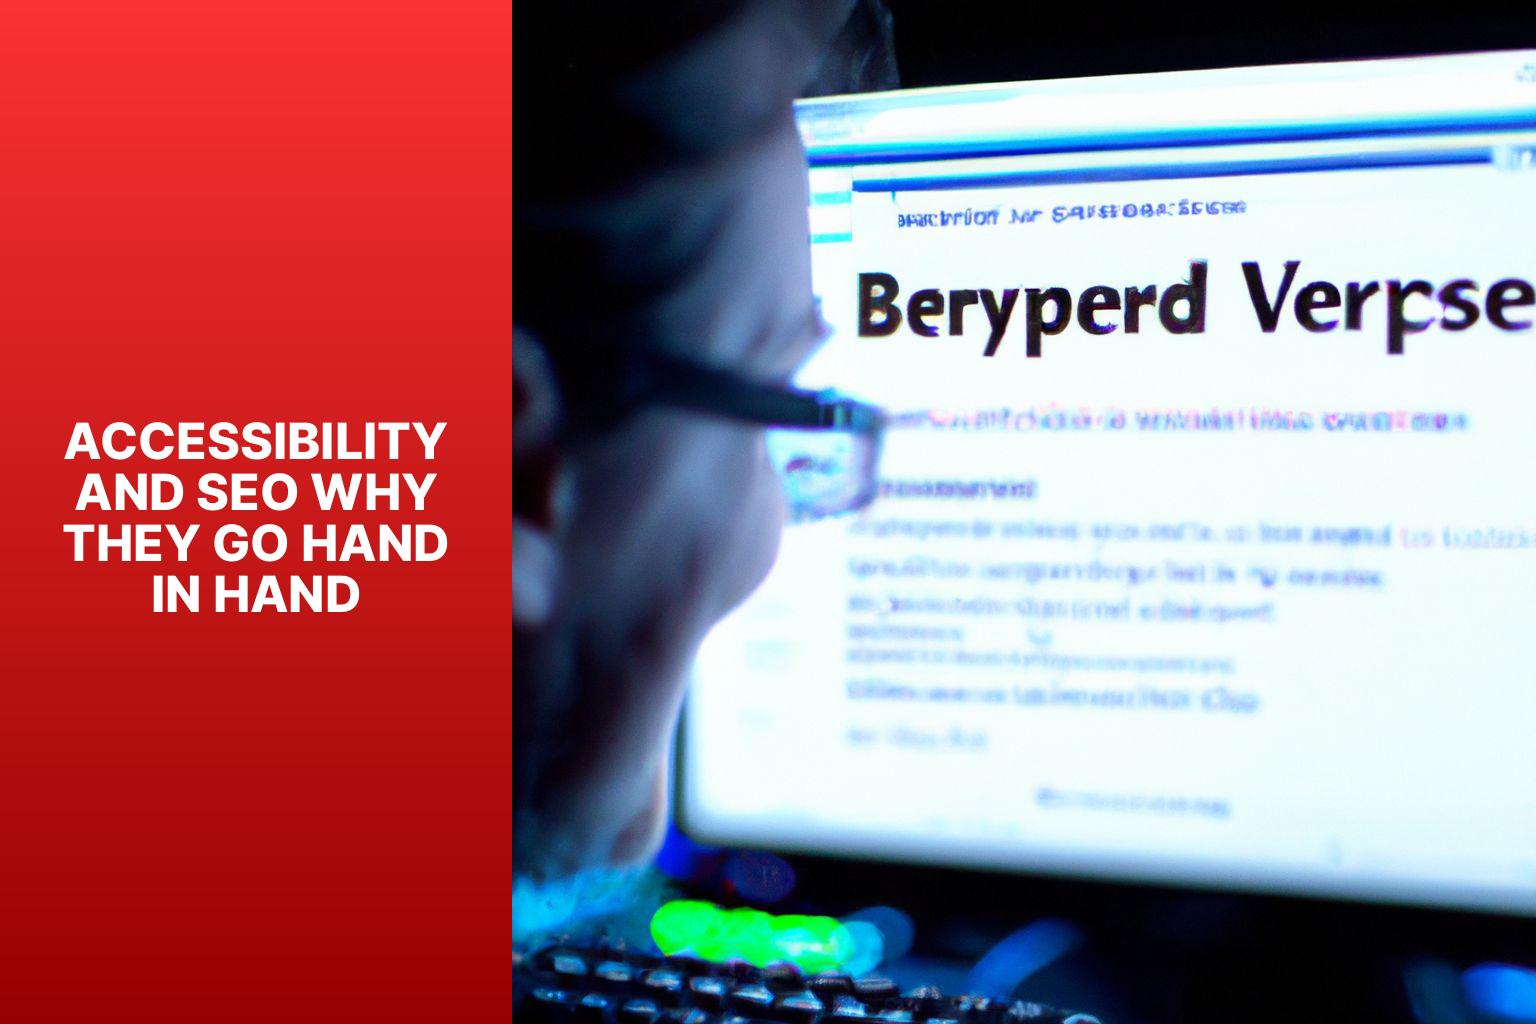 Accessibility and SEO Why They Go Hand in Hand